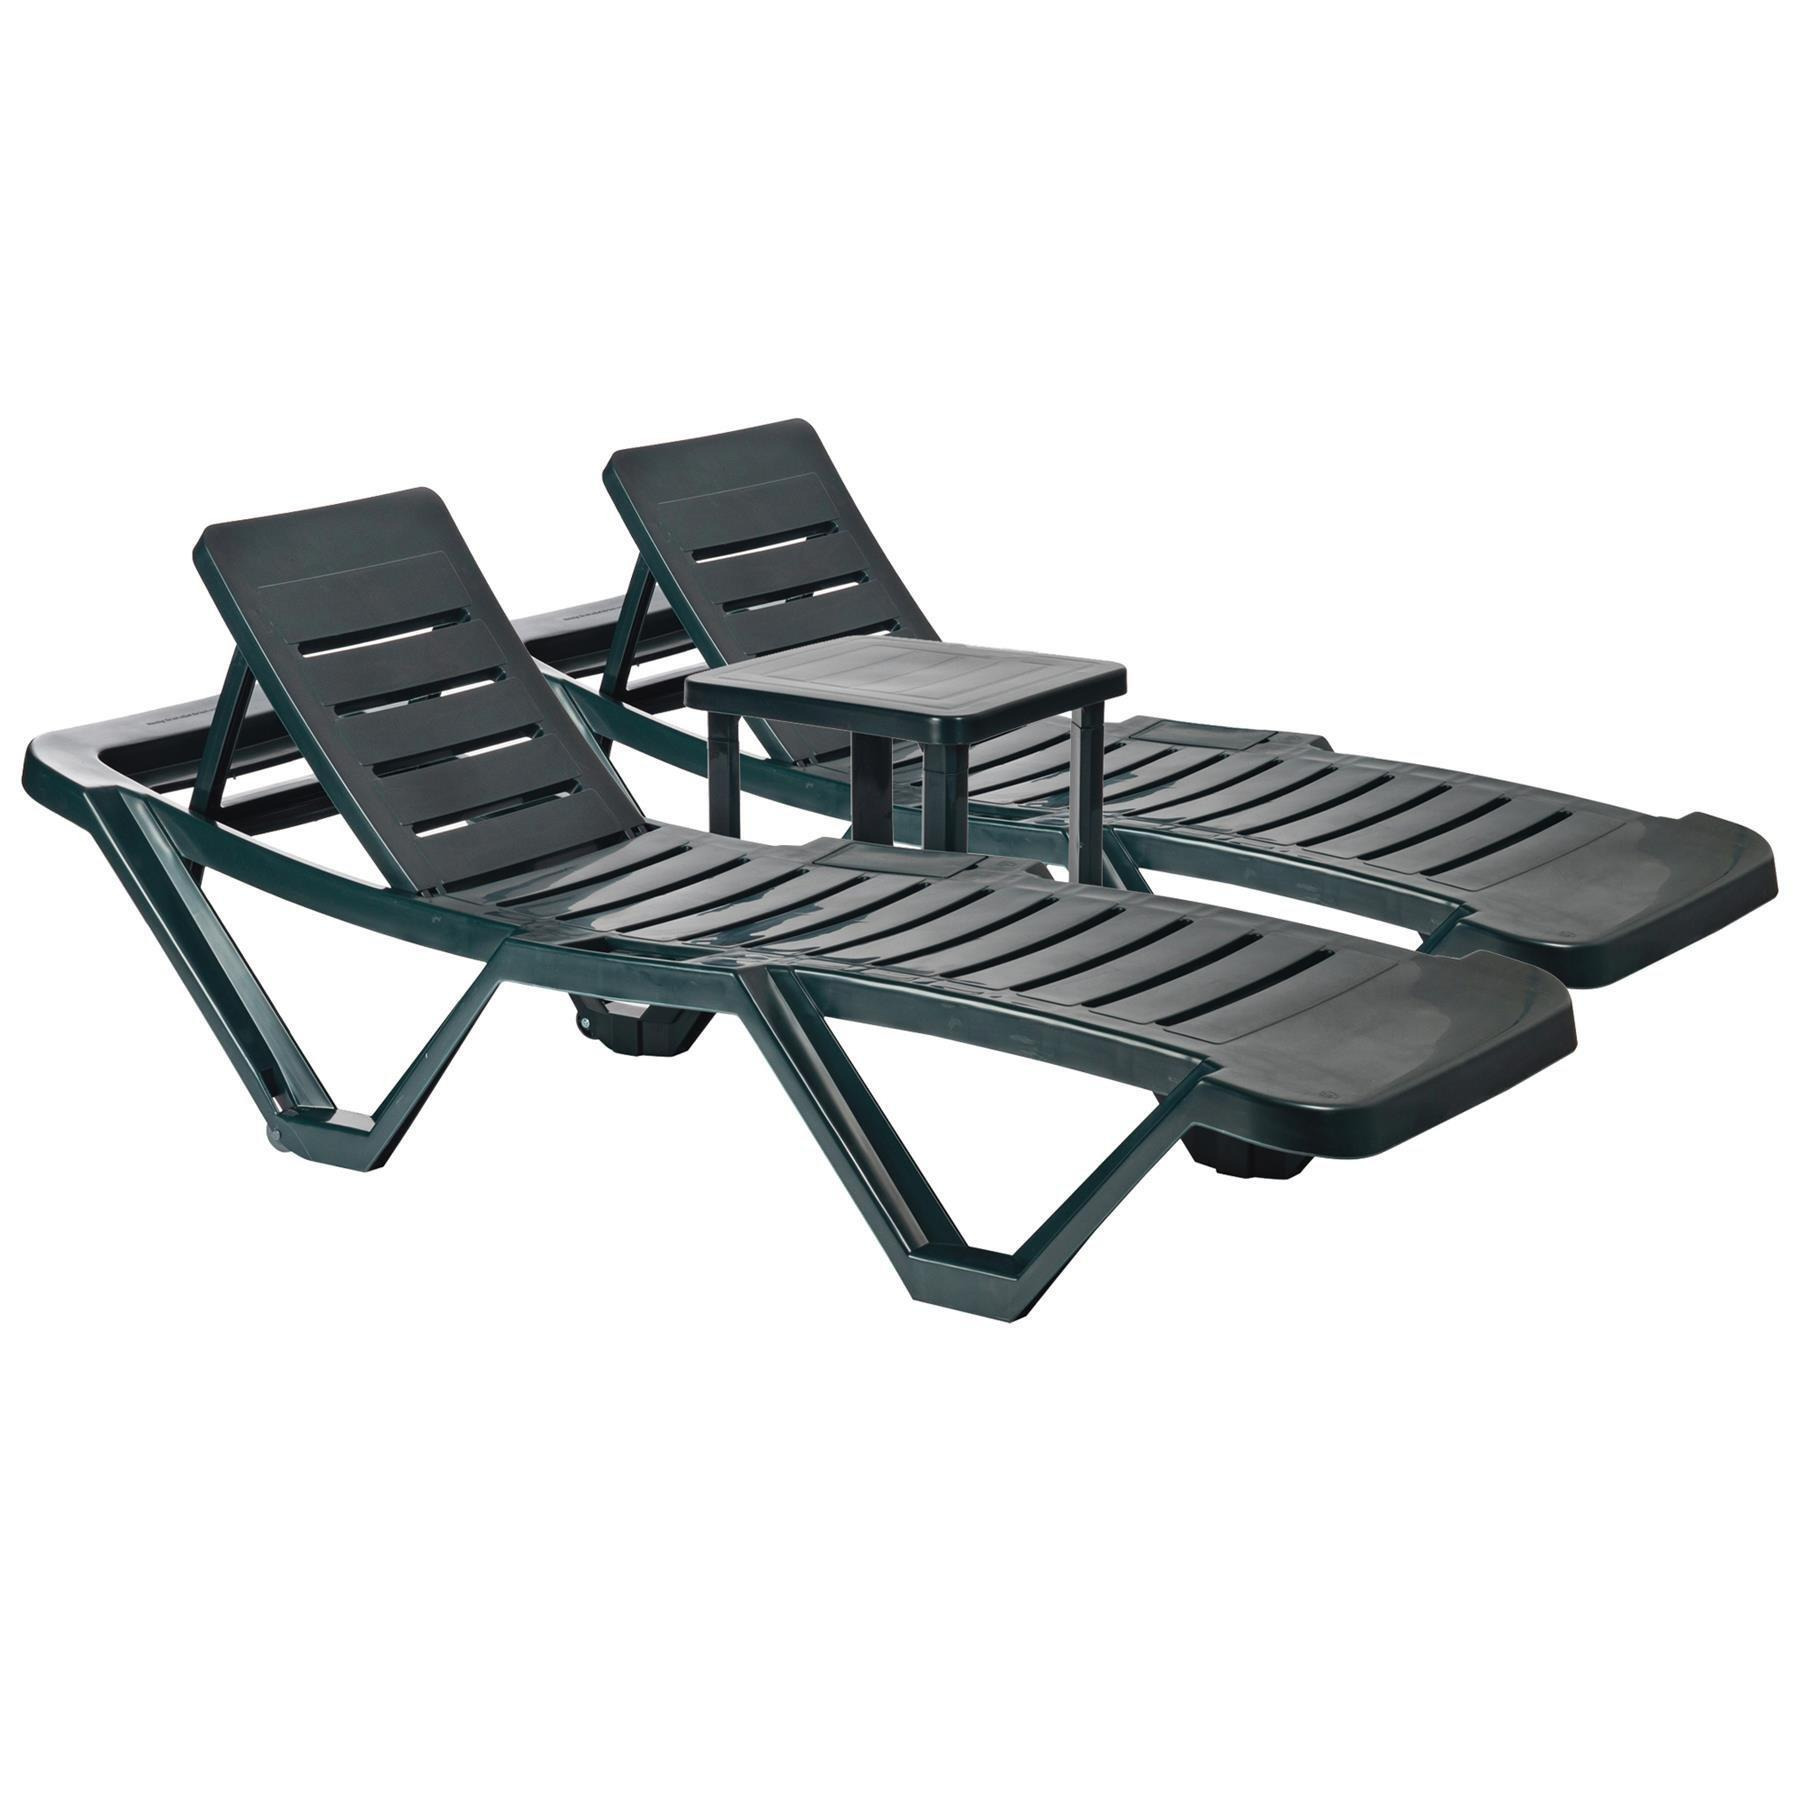 3 Piece Master Sun Loungers & Side Table Set - image 1